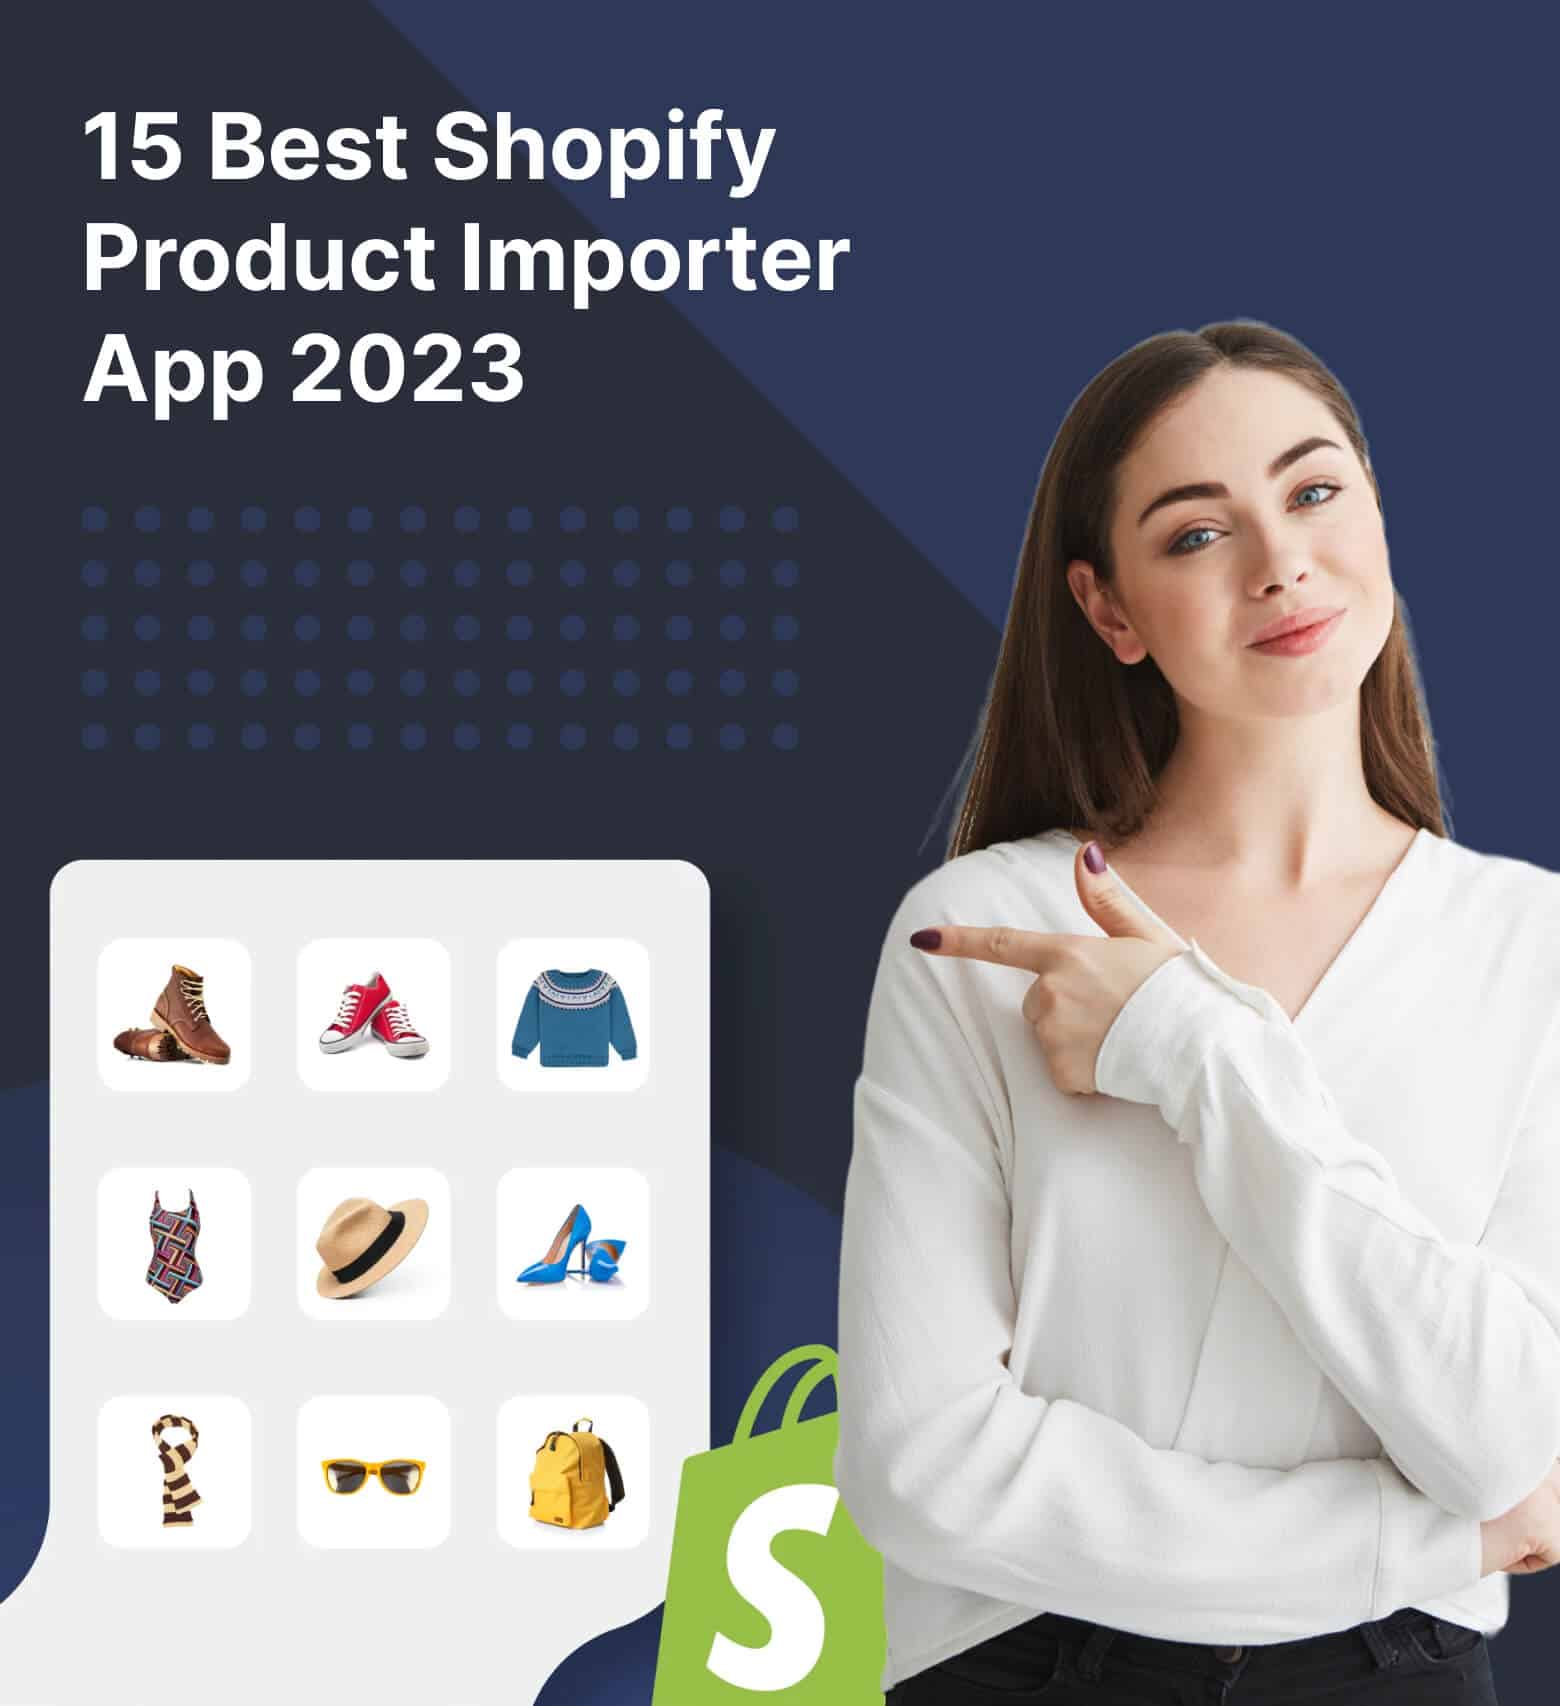 Best Shopify Product Importer App